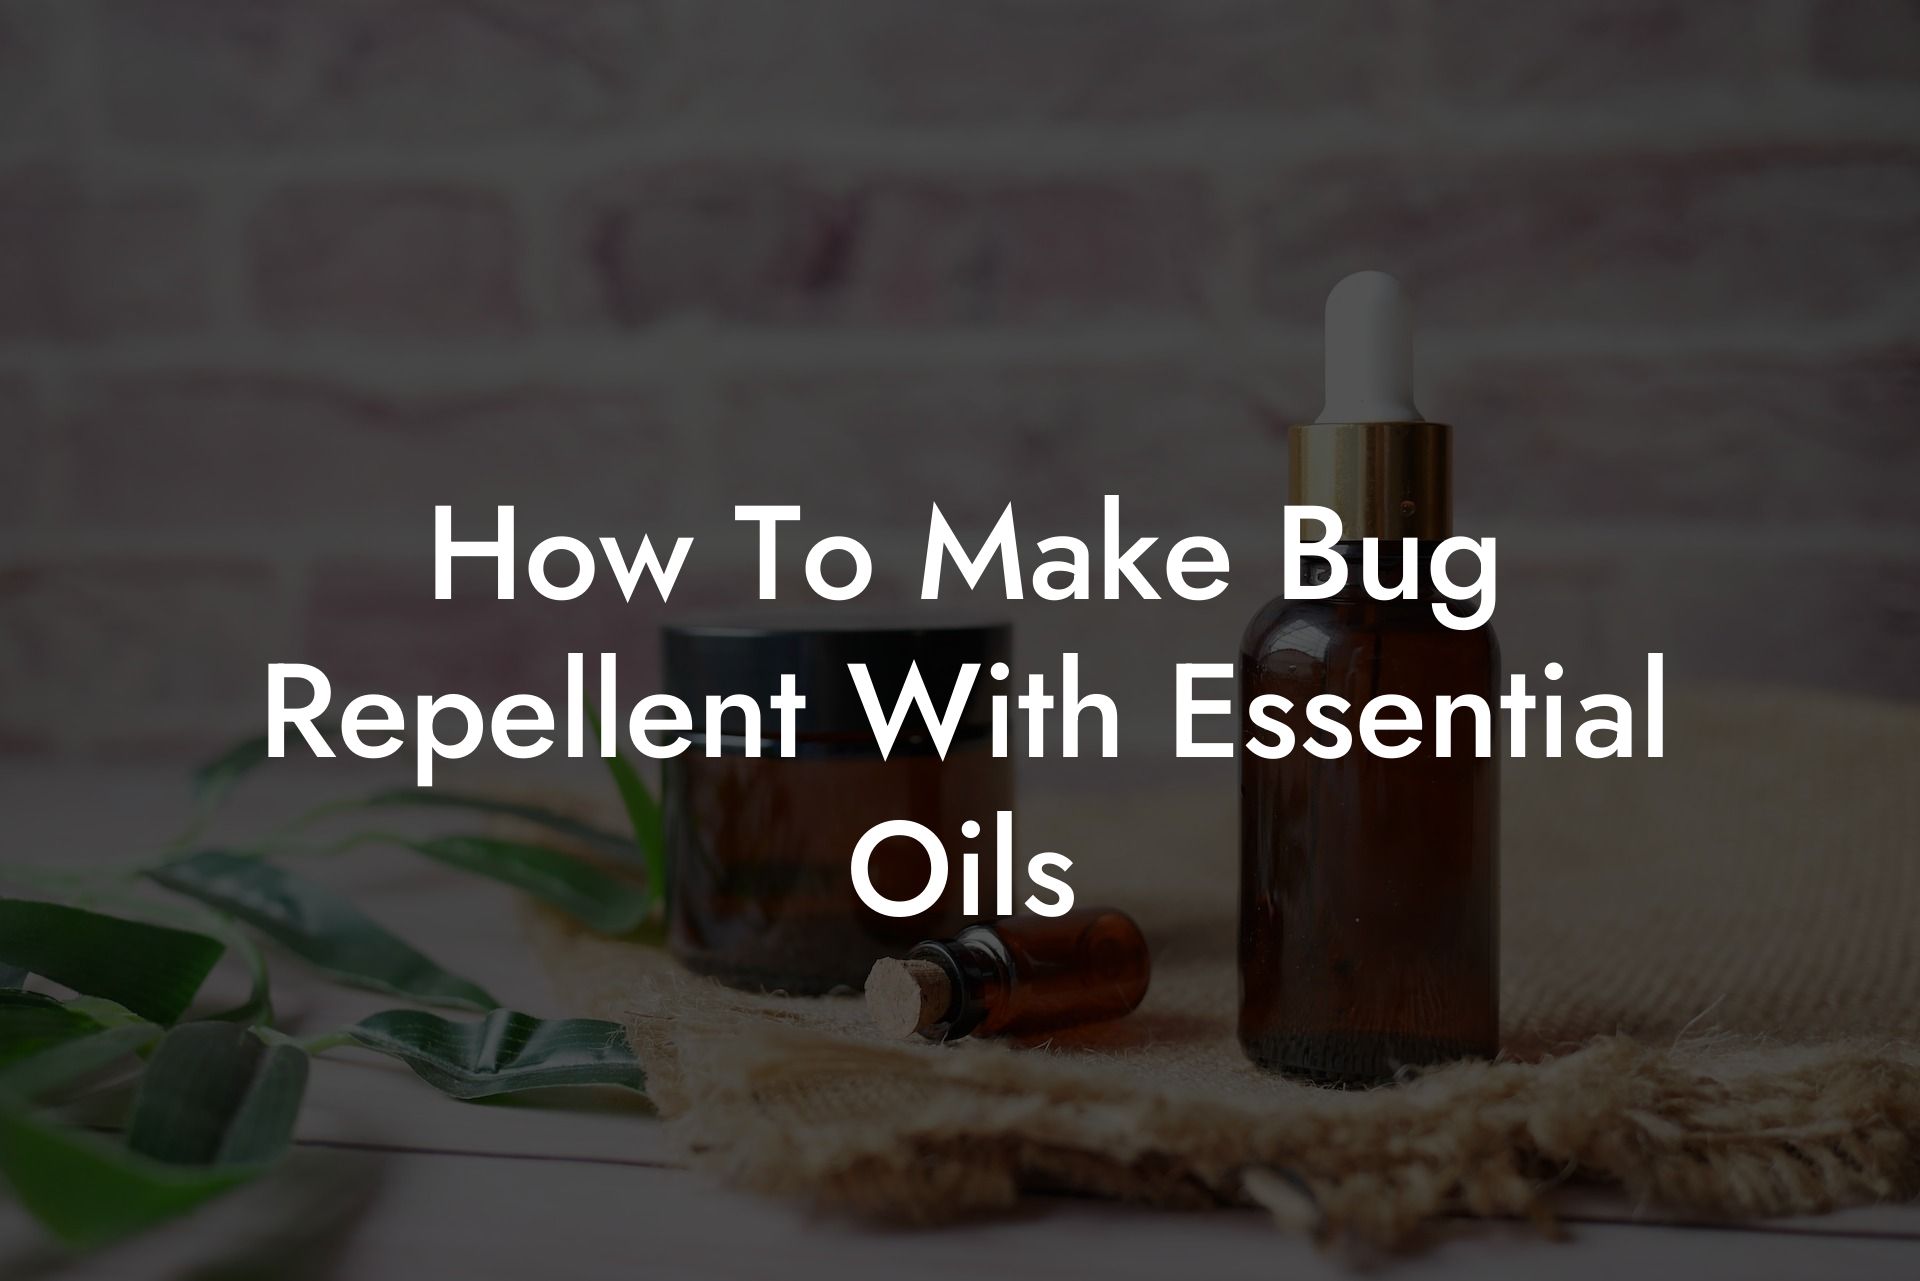 How To Make Bug Repellent With Essential Oils